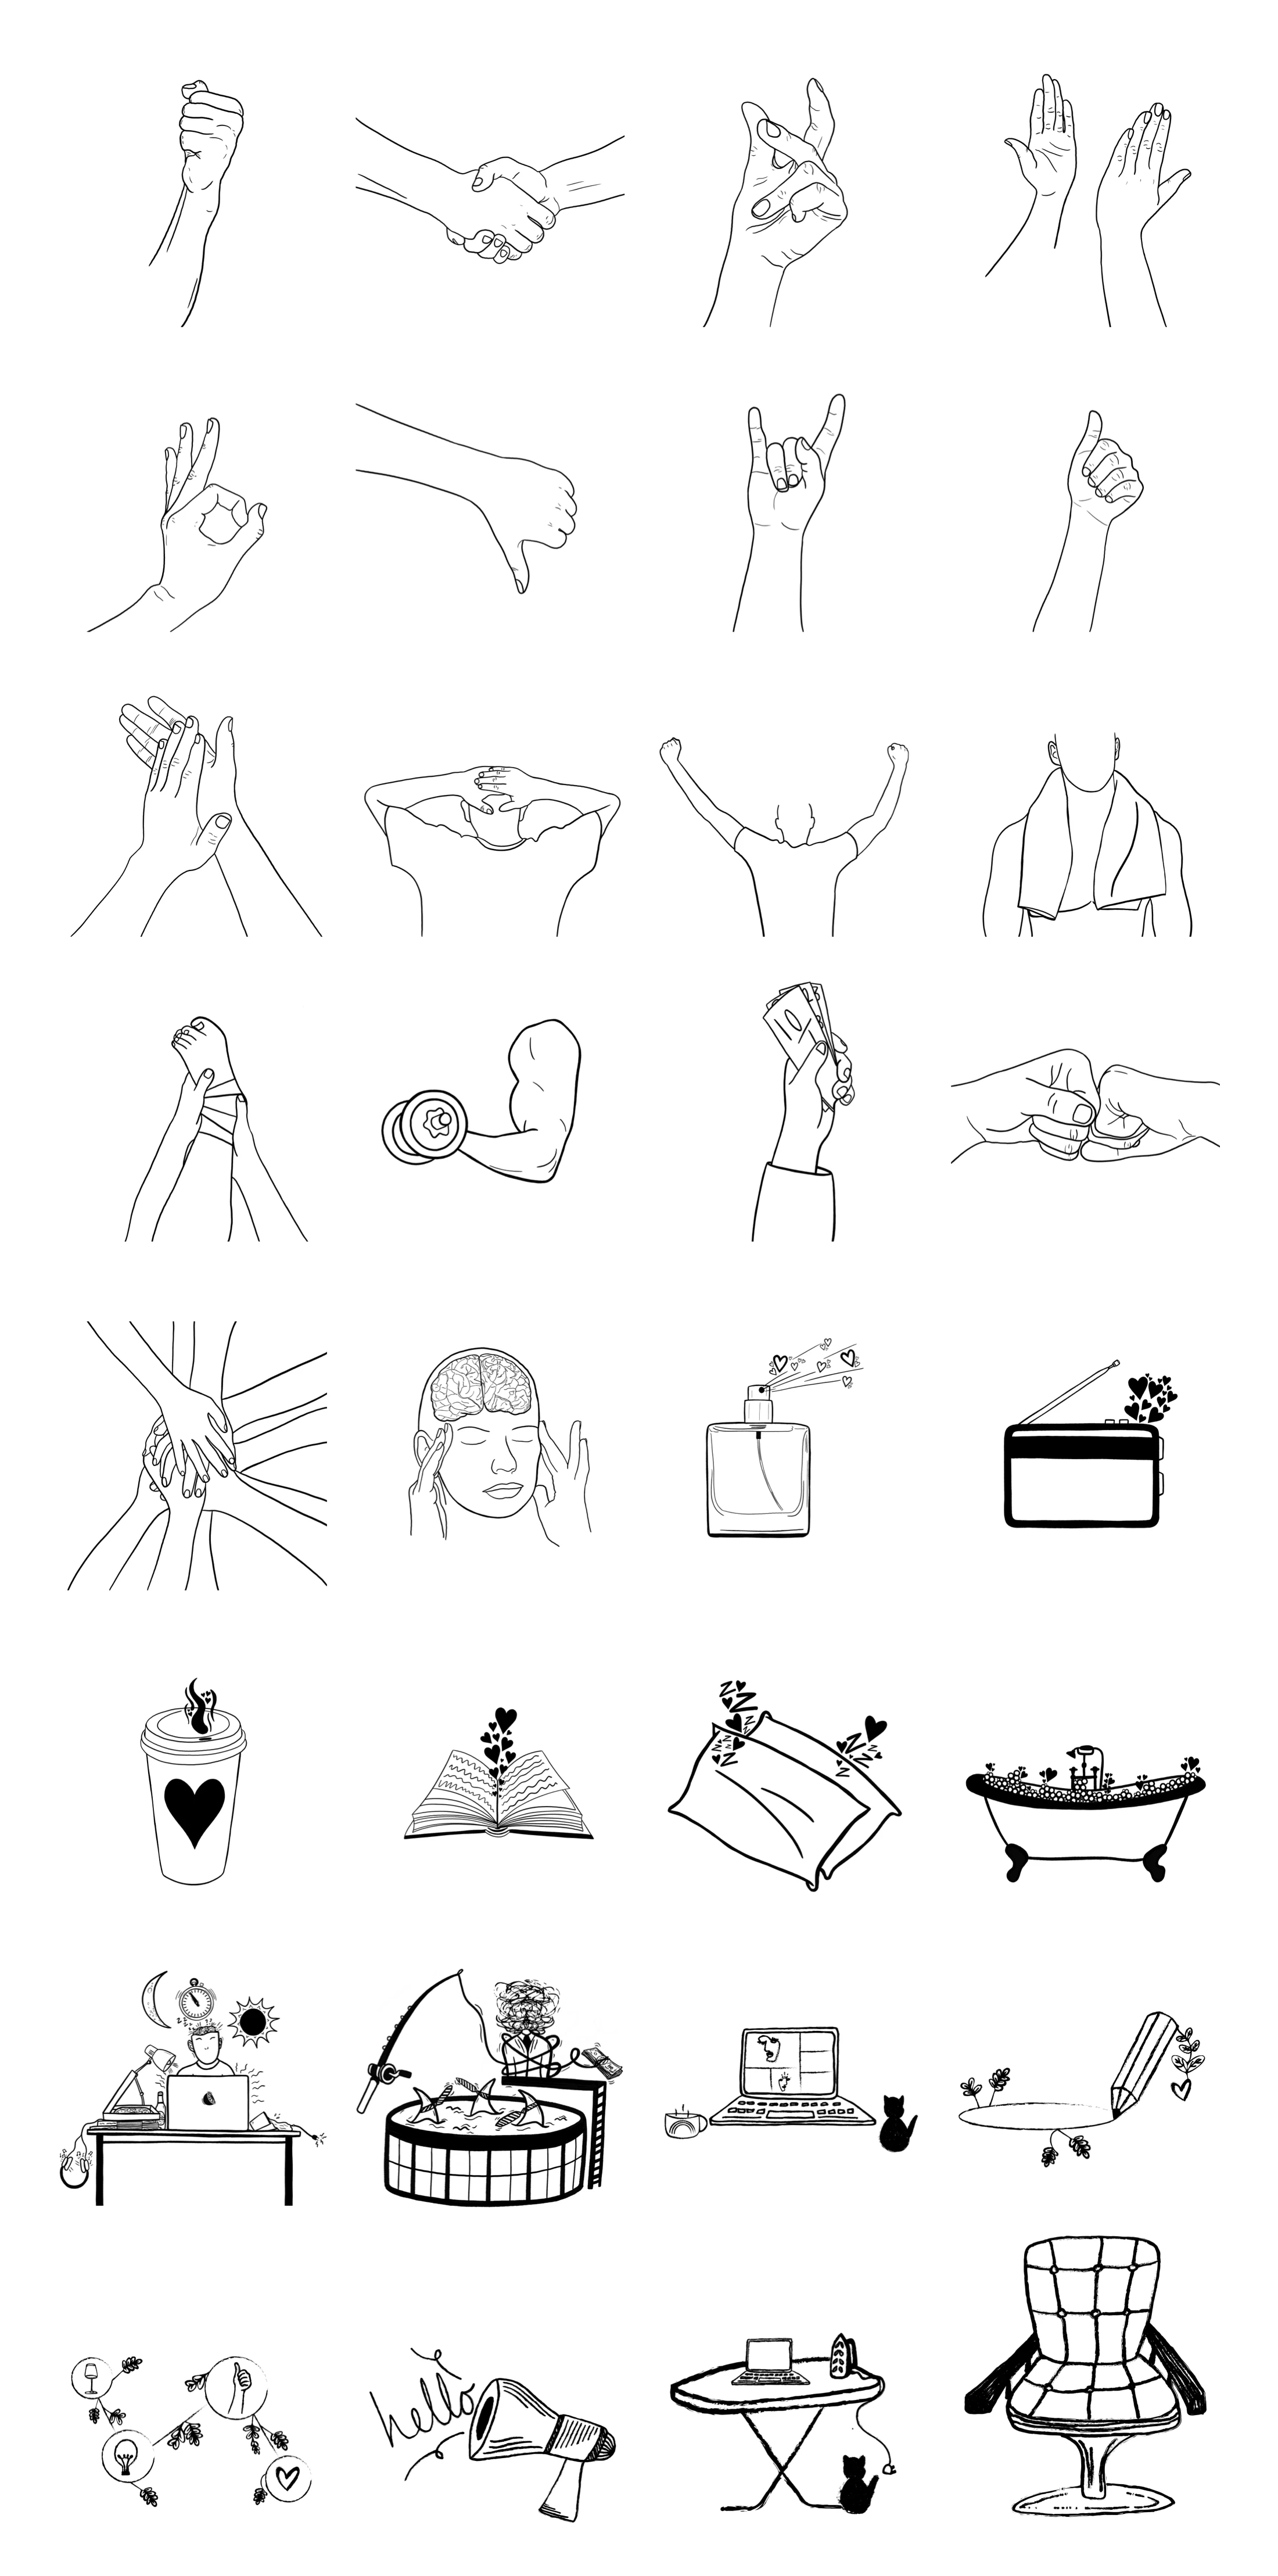 Skribbl Free Illustrations - Illustrations for everyone. A growing collection of free, hand-drawn illustrations brought to you by a global community of aspiring creatives.